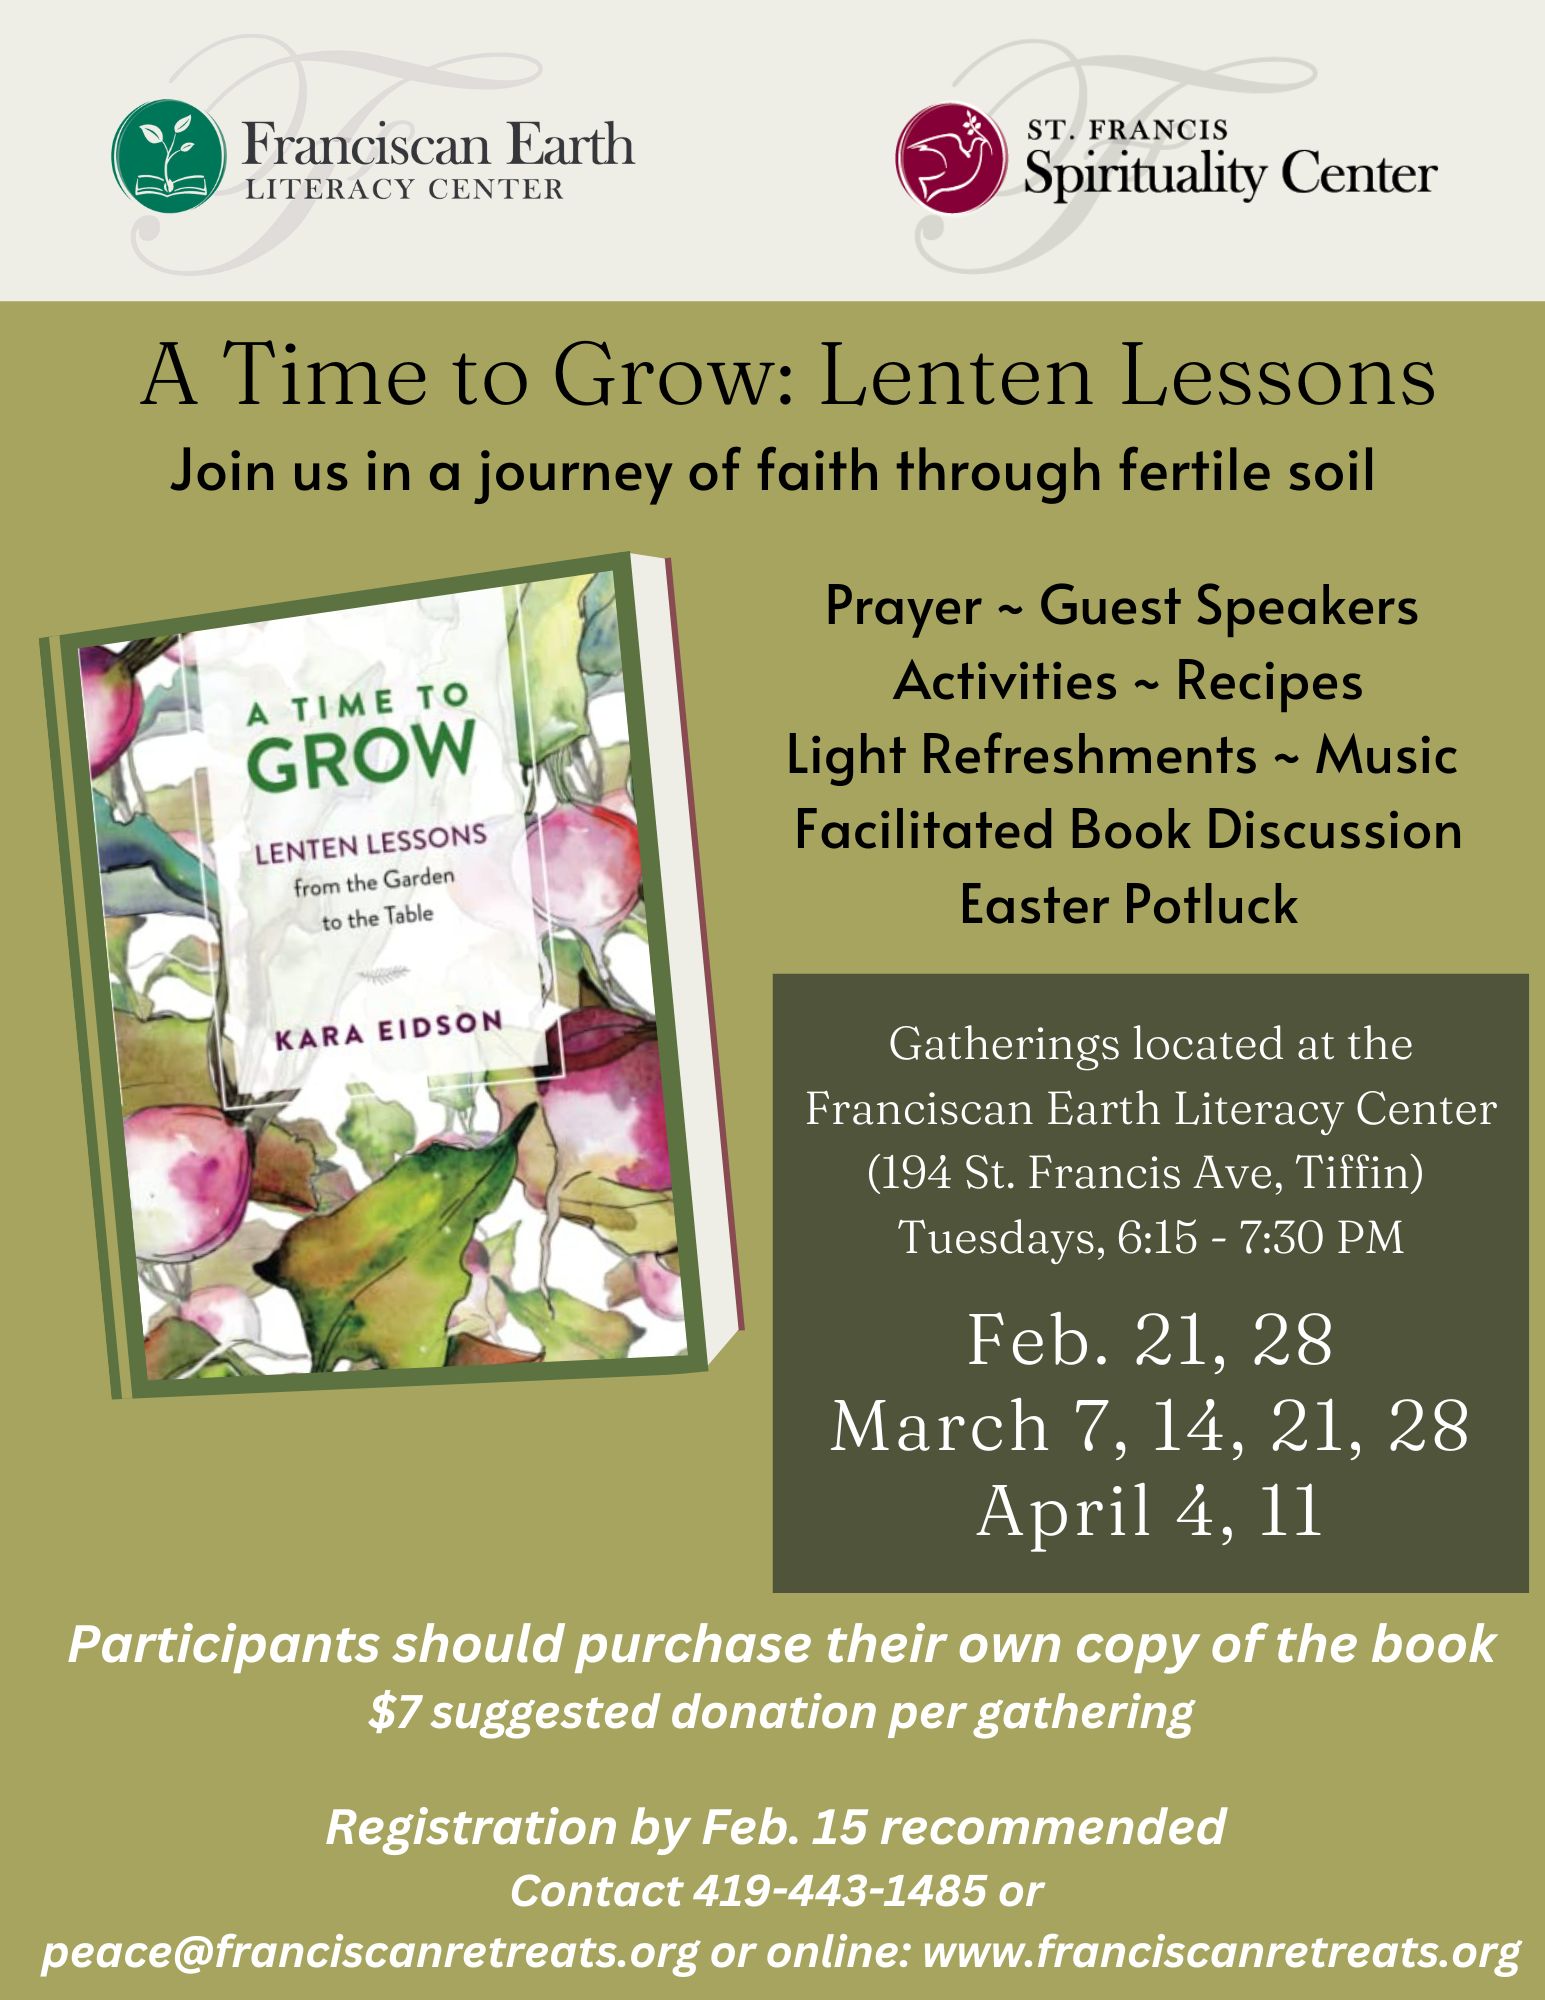 A Time to Grow: Lenten Lessons